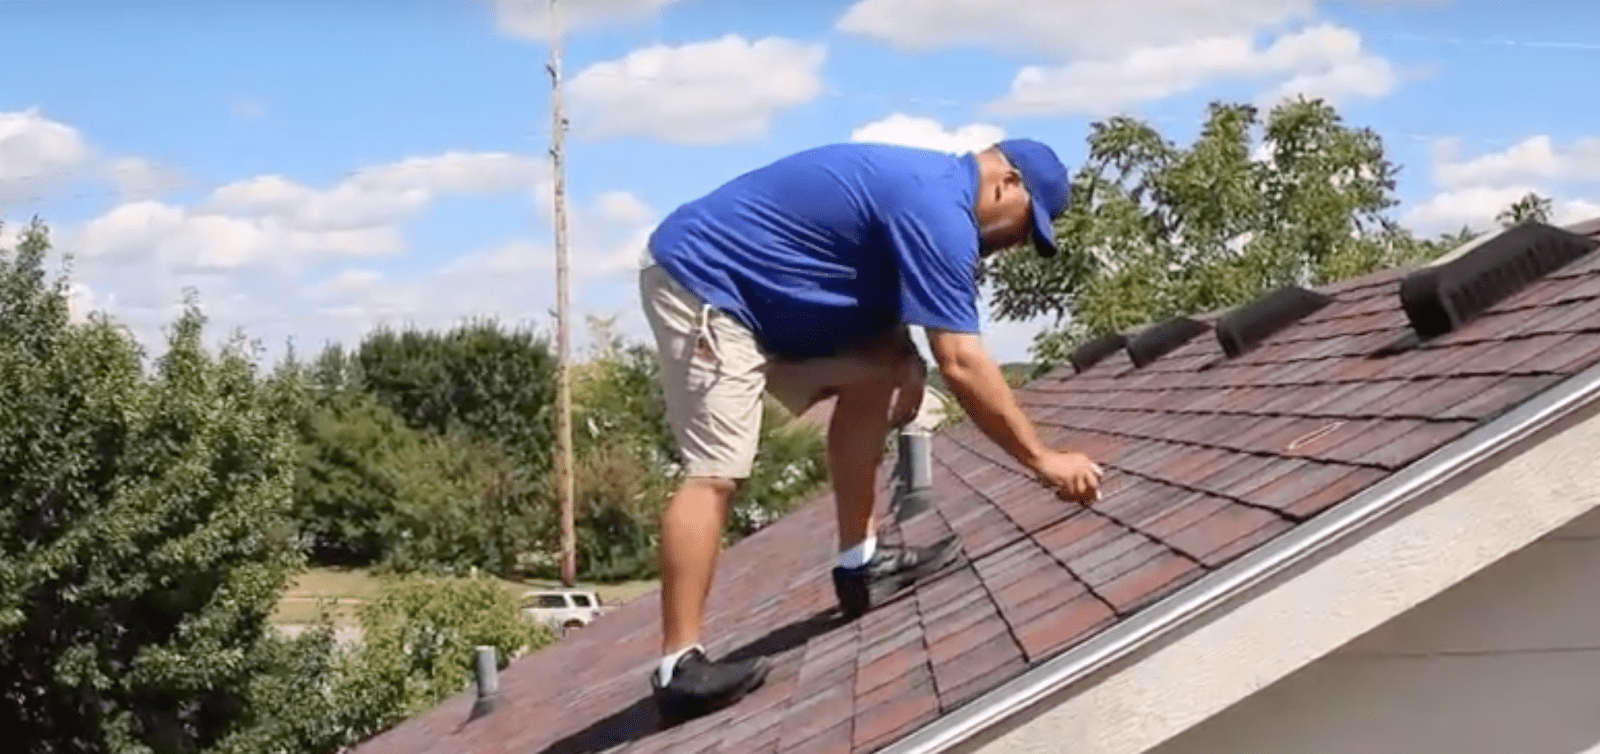 HOW TO DO A ROOF INSPECTION WITH A DRONE